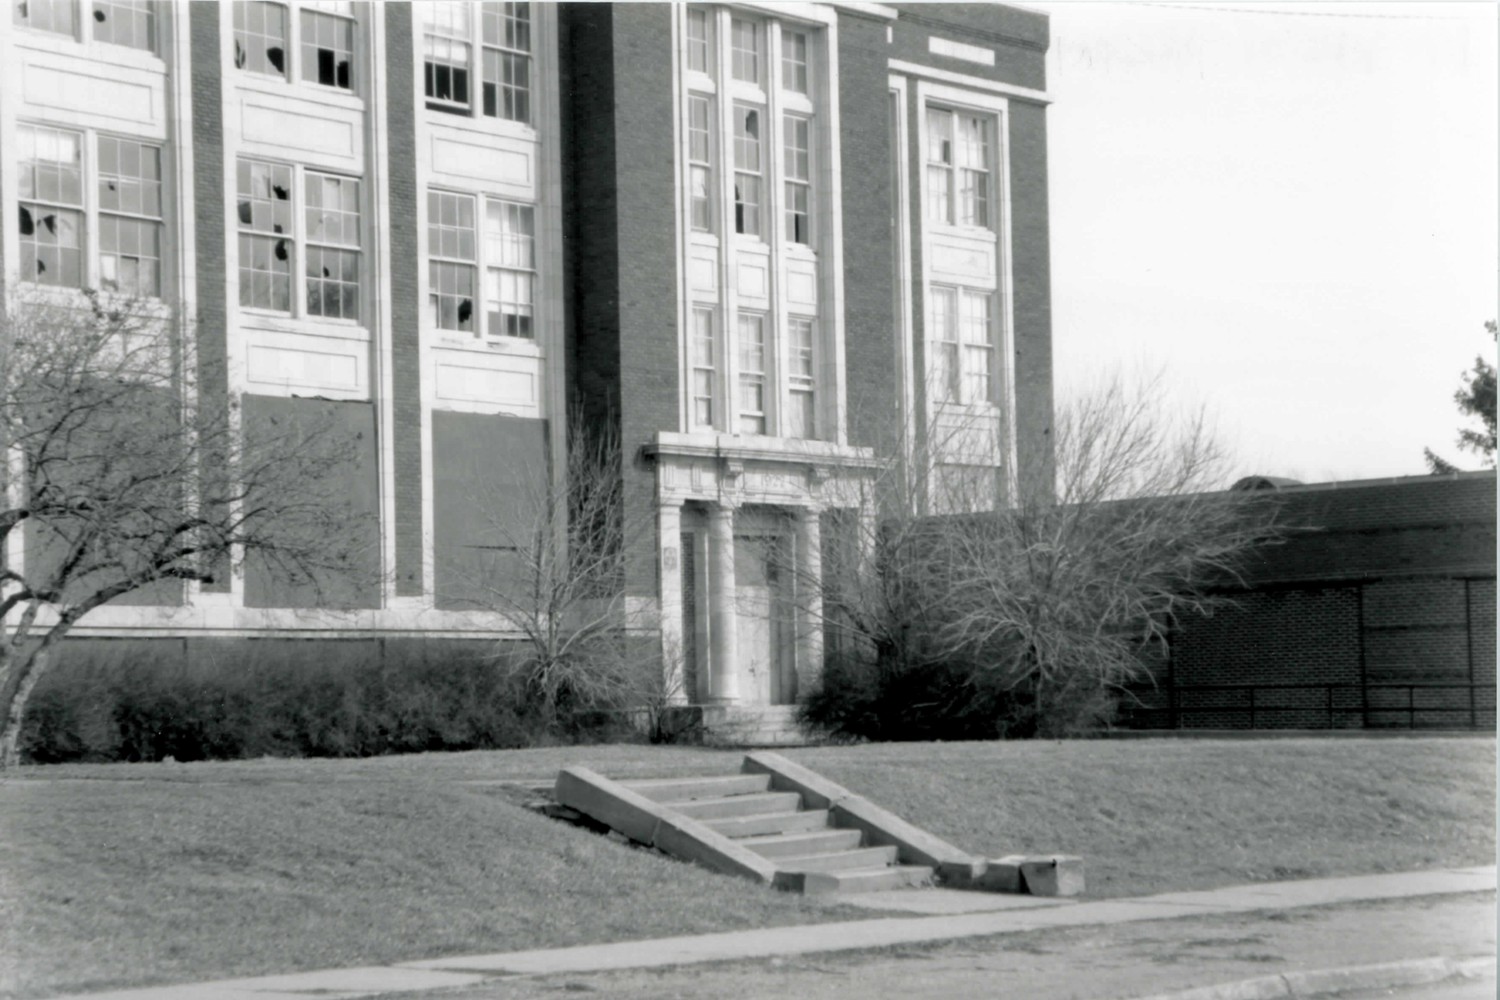 West Technical High School, Cleveland Ohio South Elevation looking northeast (2000)